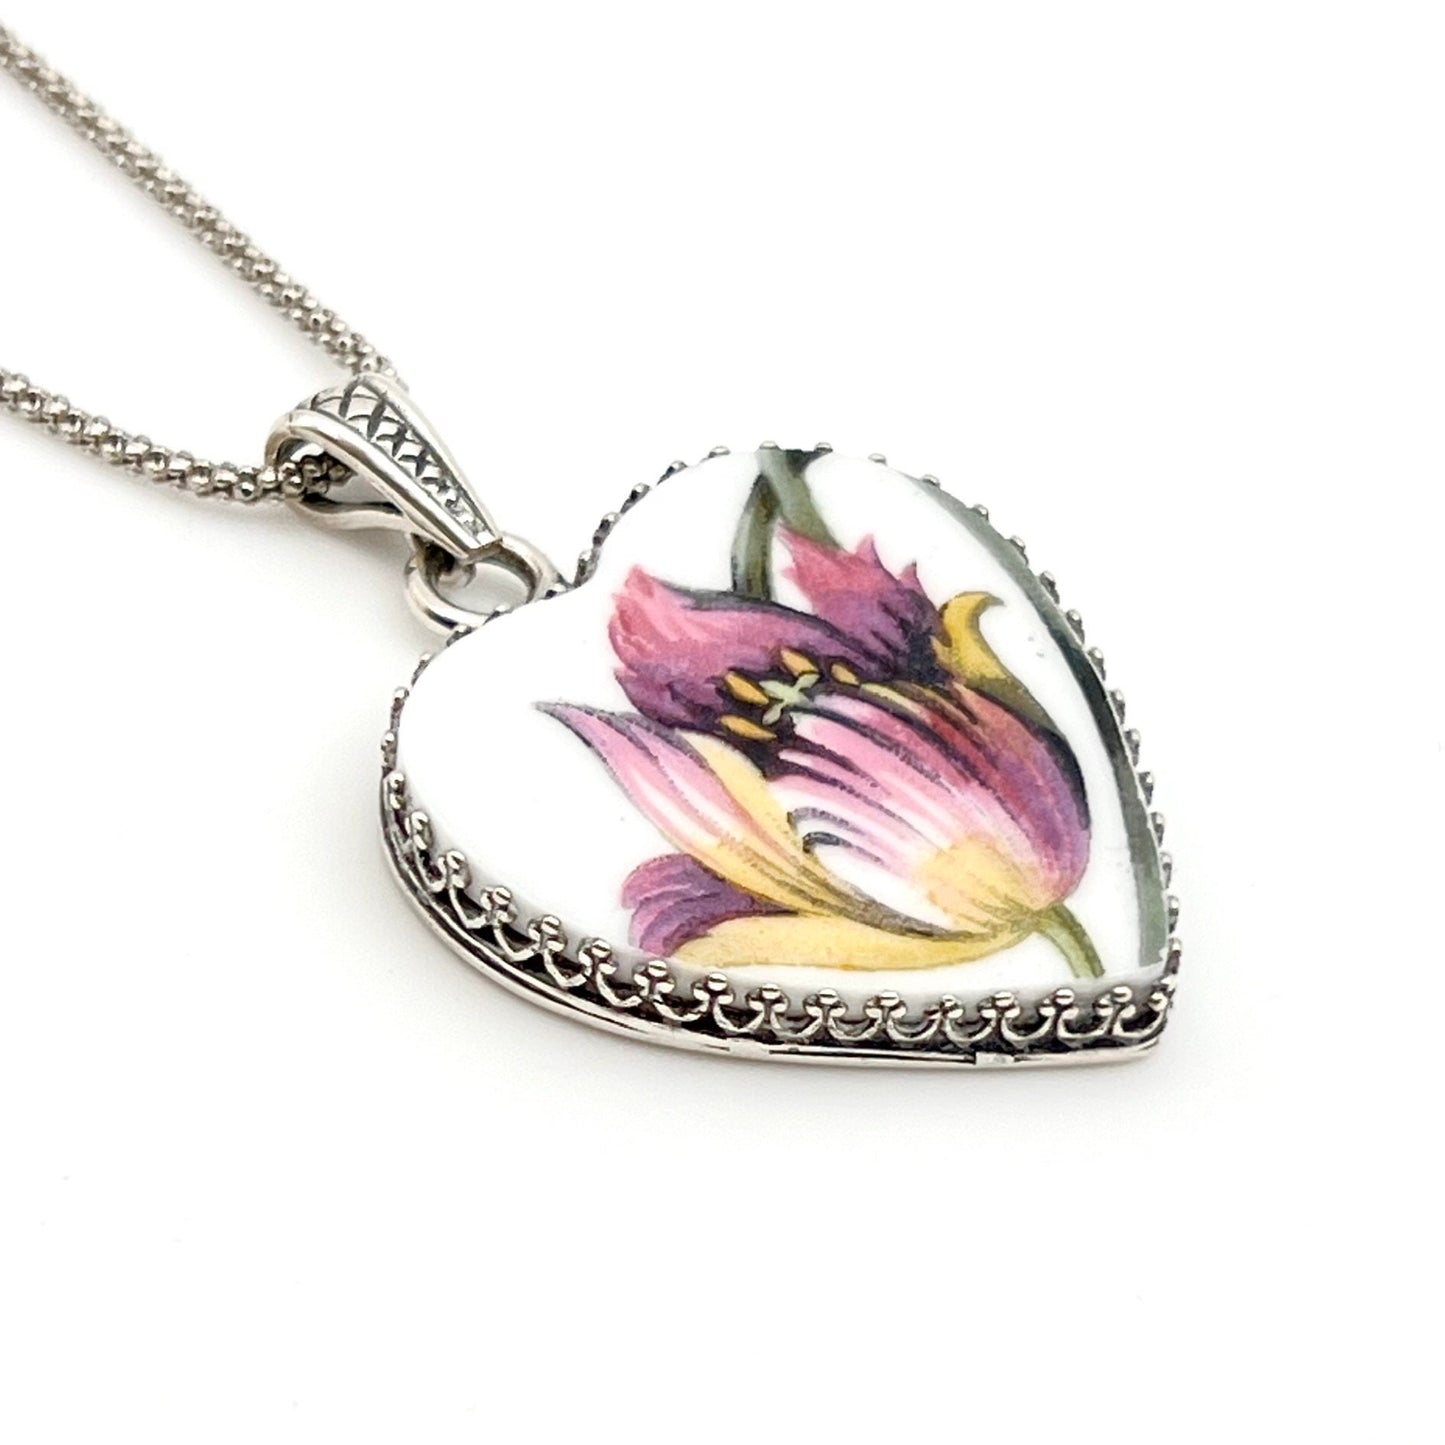 Tulip Heart Necklace, 20th Anniversary Gift for Wife, Romantic Victorian Heart Necklace, Broken China Jewelry, Jewelry Gifts for Women